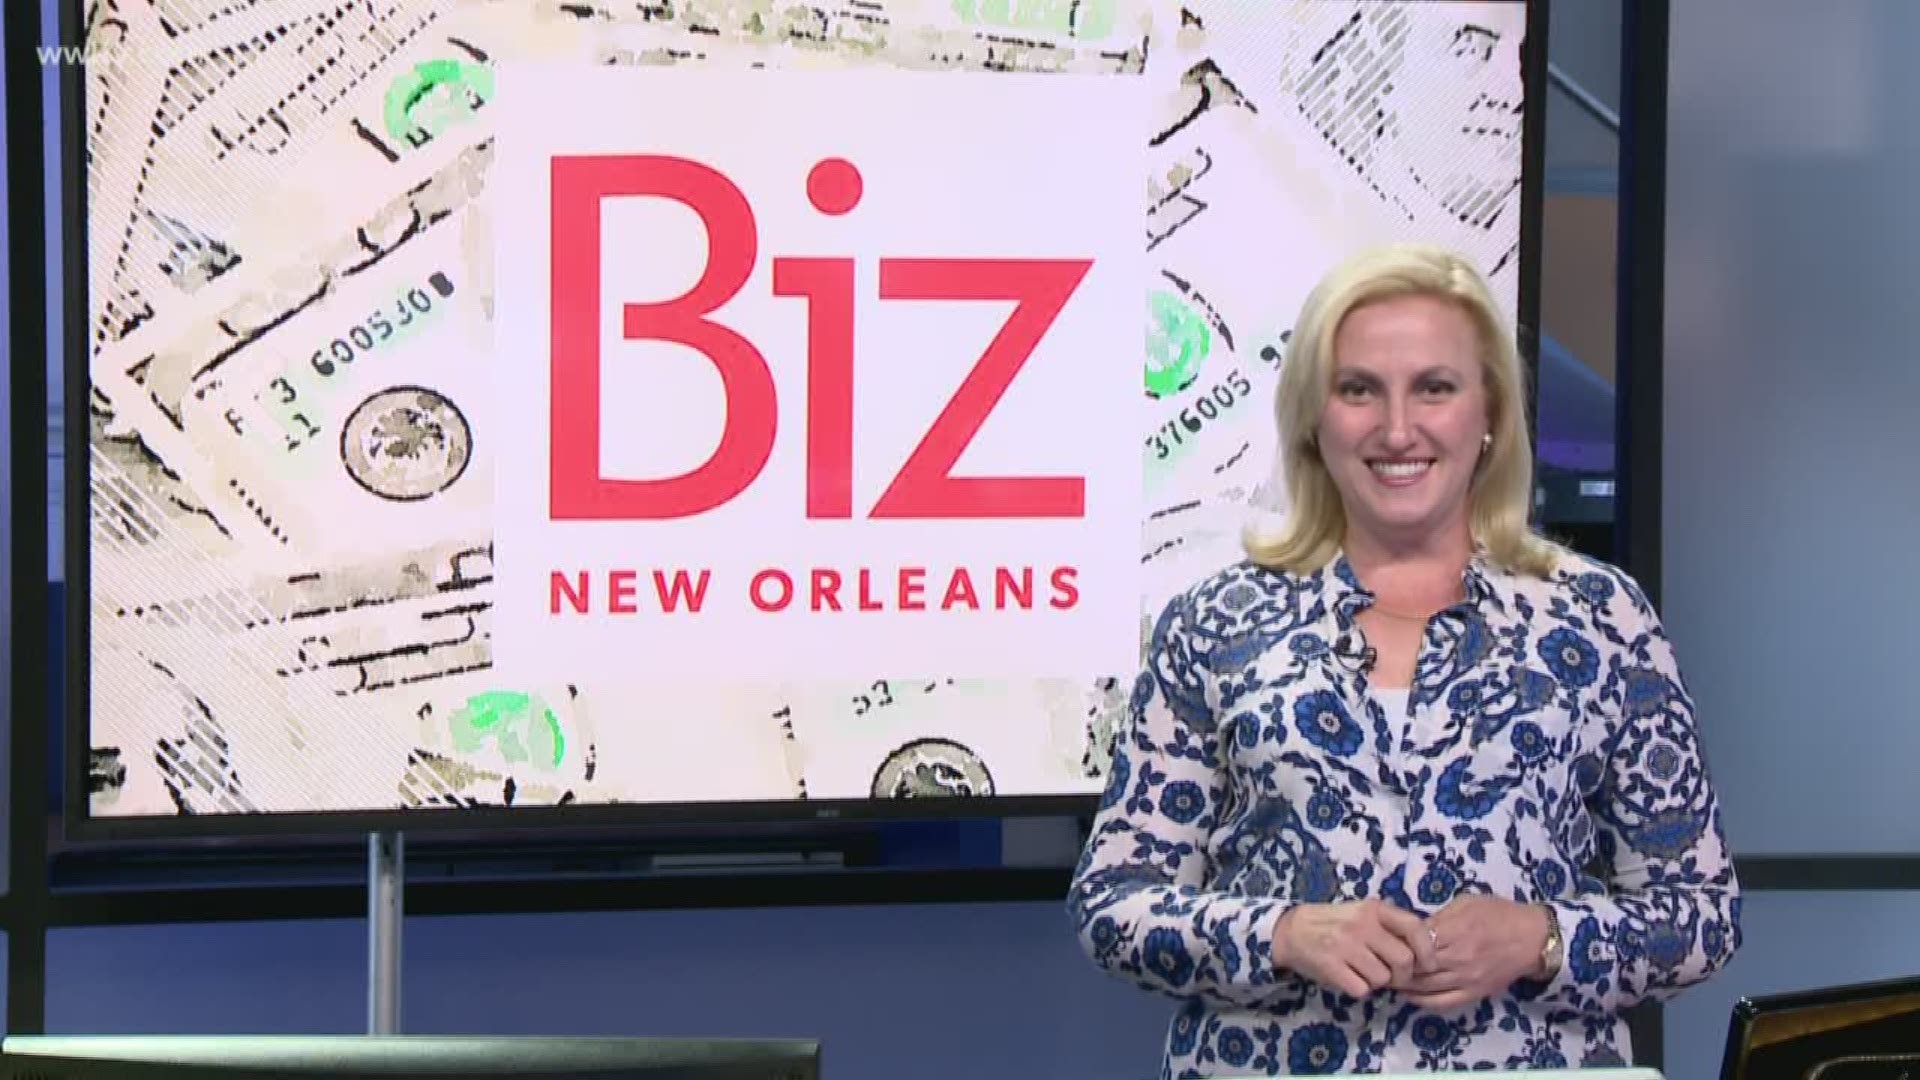 If you’re celebrating America’s birthday, you’ll probably do so with lots of food, drinks and fireworks. But how much are you going to spend this July 4th? Biz New Orleans' Leslie Snadowsky shares share some staggering statistics about what it costs to commemorate the red, white and blue.